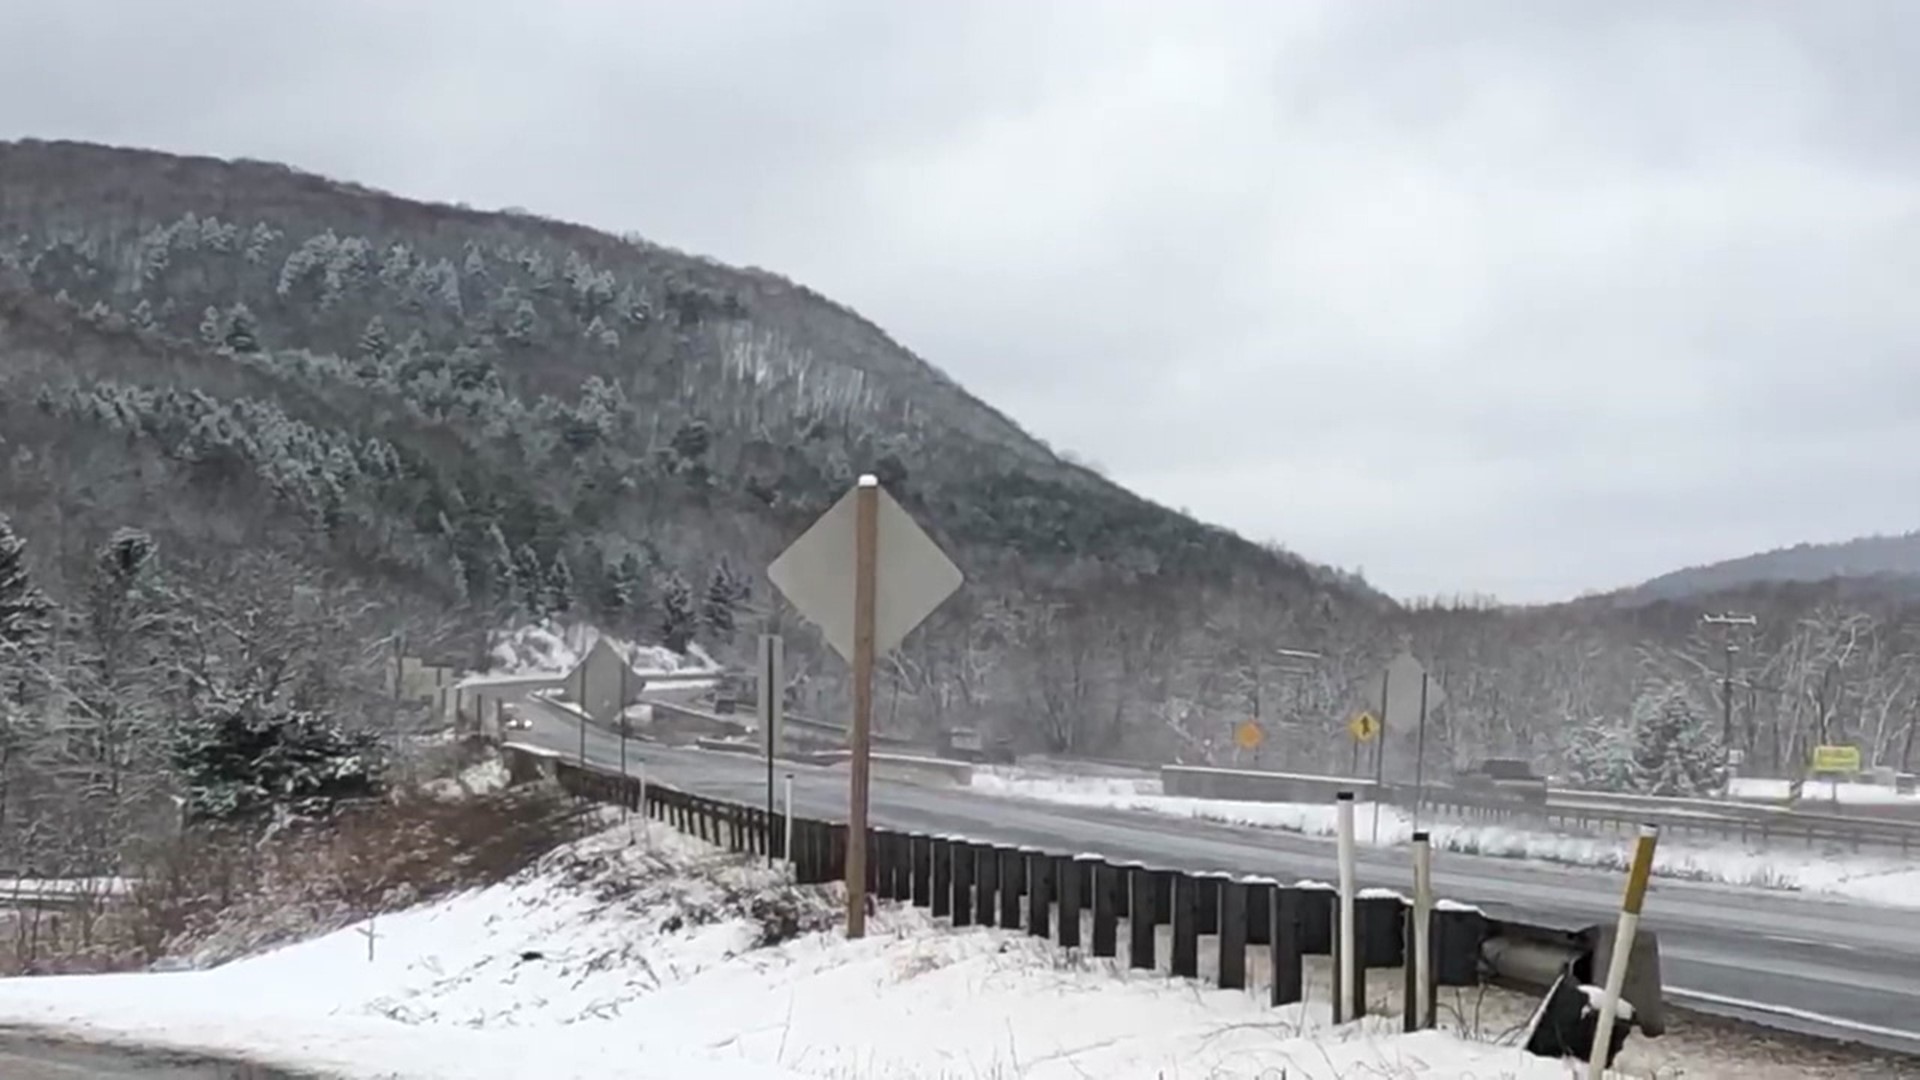 People who spoke to Newswatch 16 had mixed feelings about PennDOT's proposal to install an electronic toll on Interstate 81 that crosses Route 171 near Hallstead.